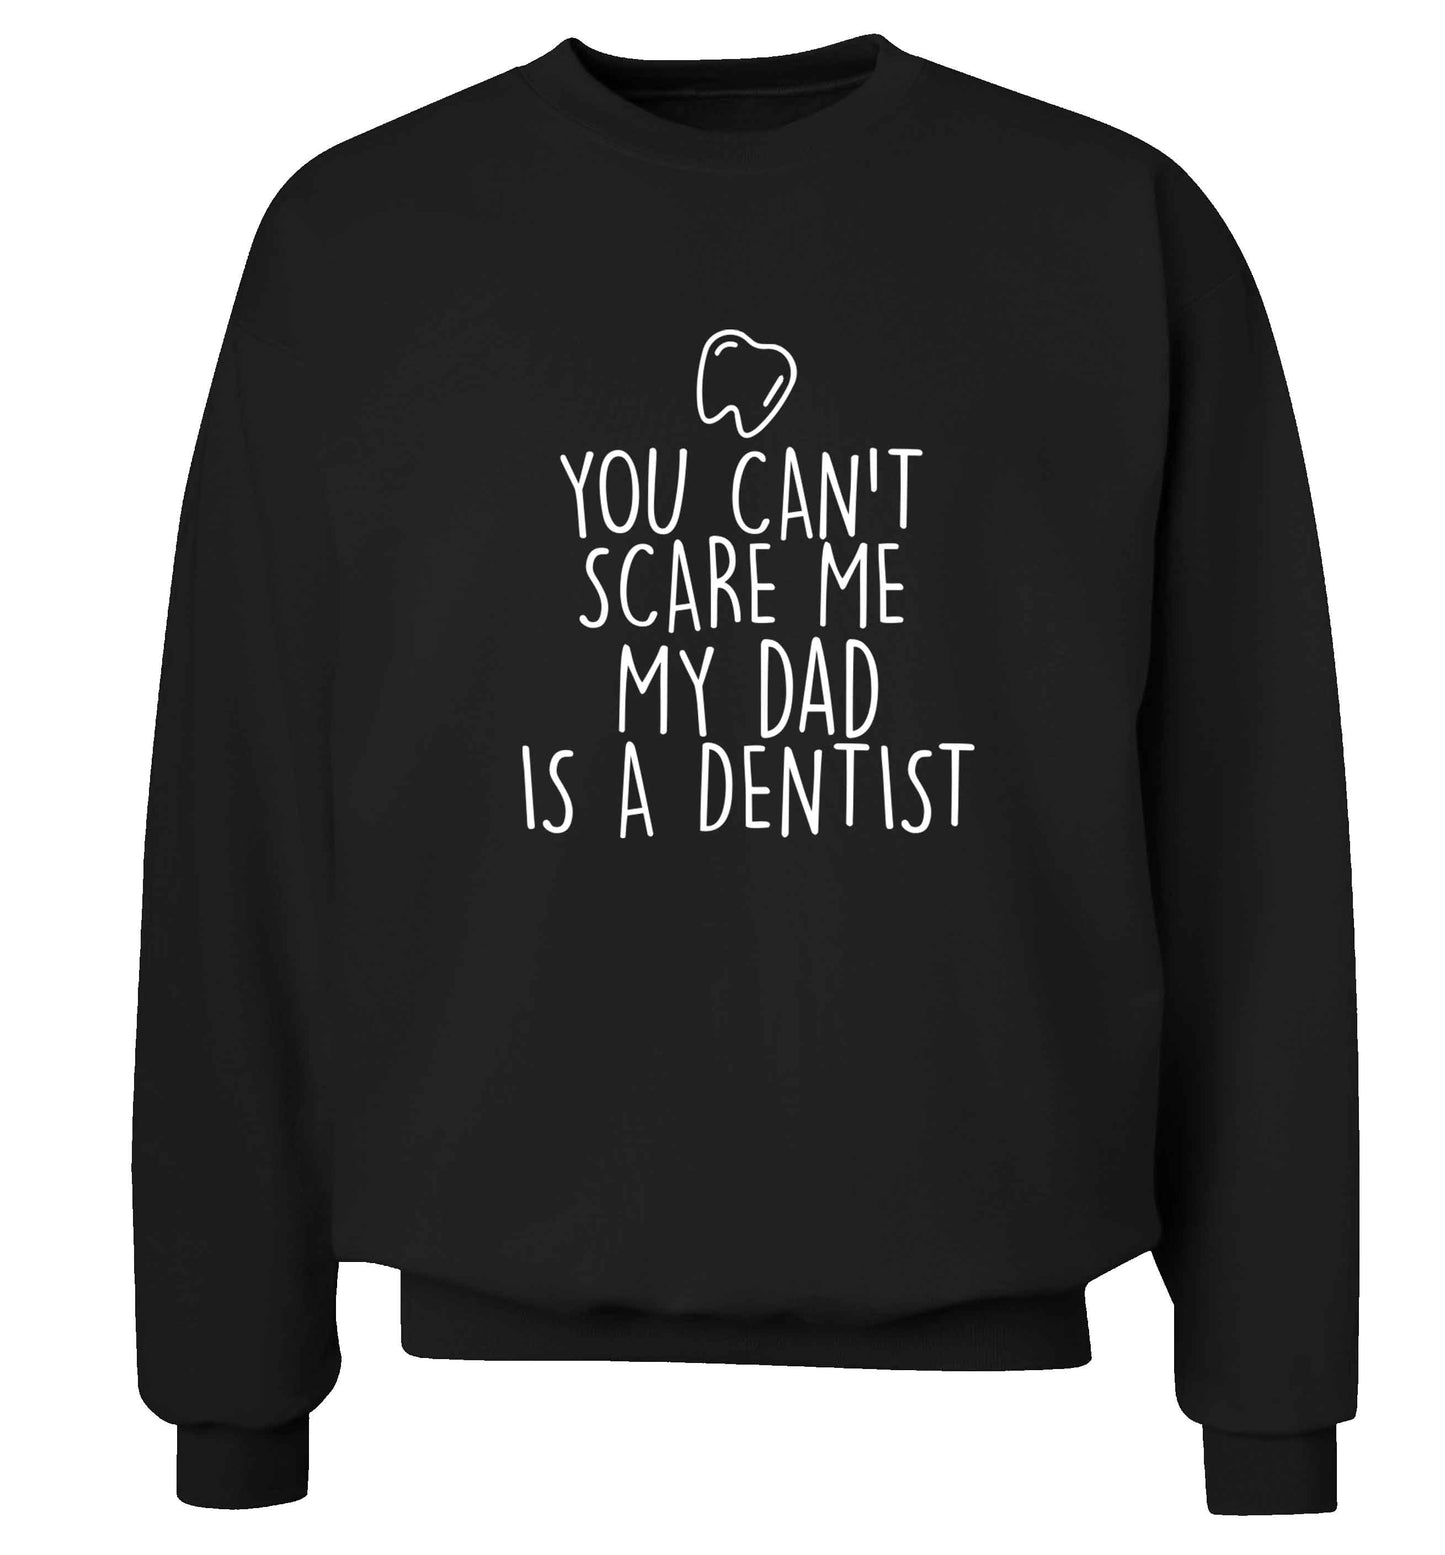 You can't scare me my dad is a dentist adult's unisex black sweater 2XL